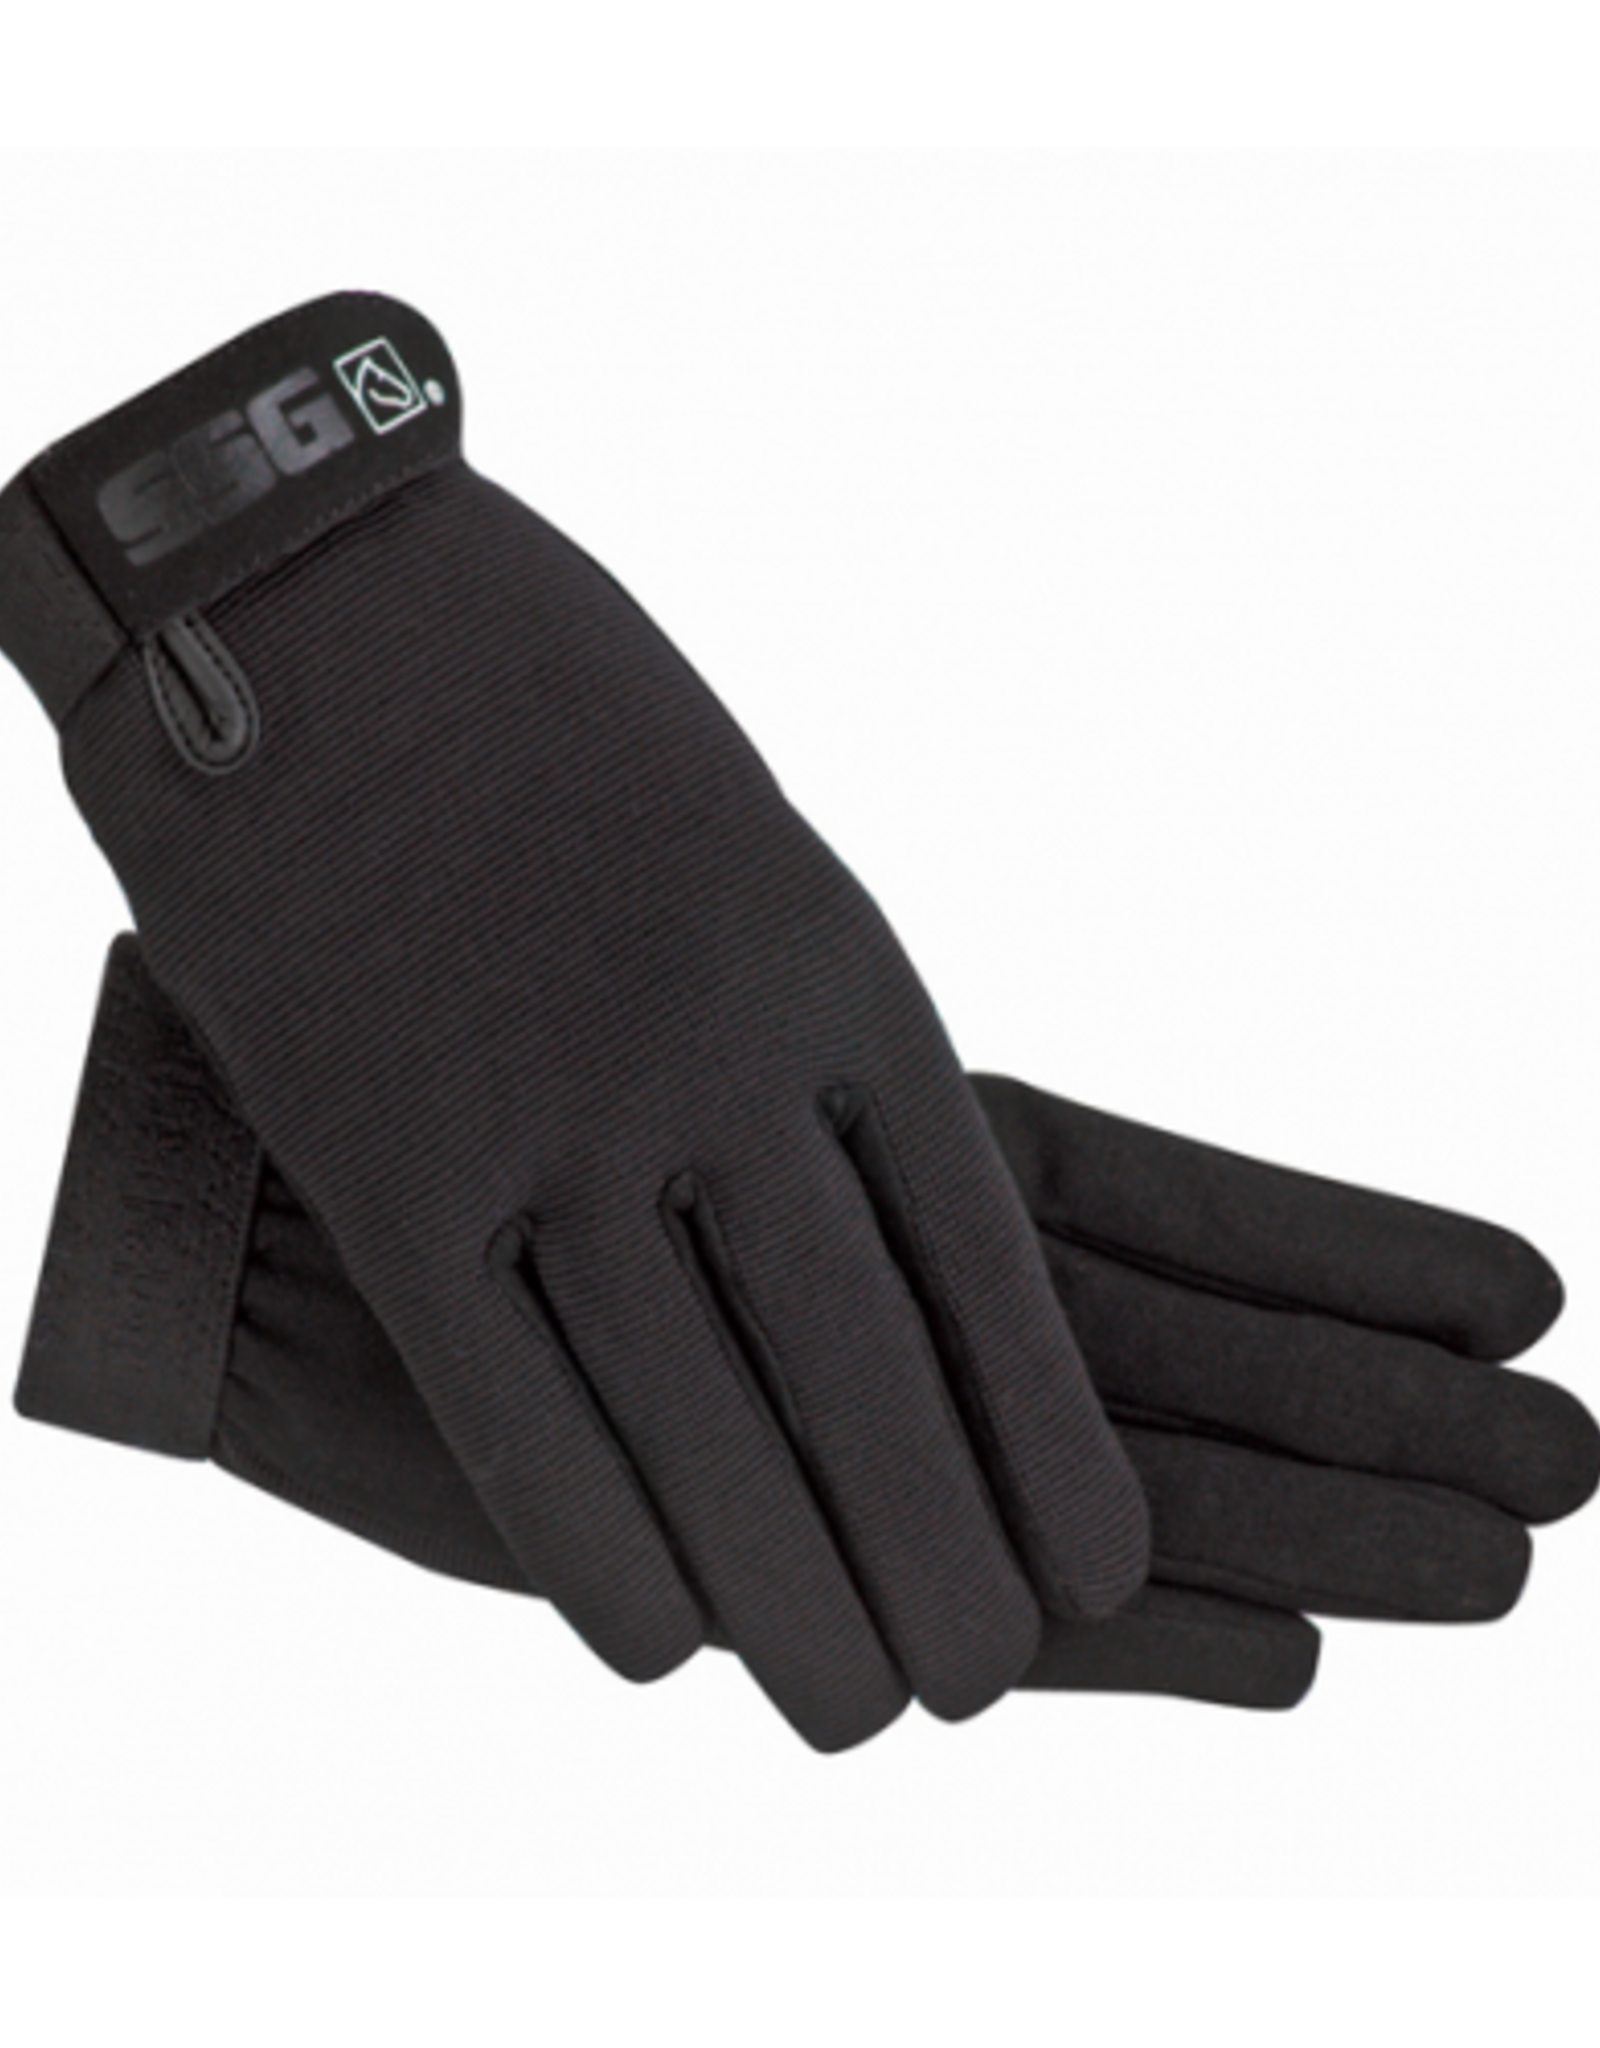 SSG ALL WEATHER GLOVES